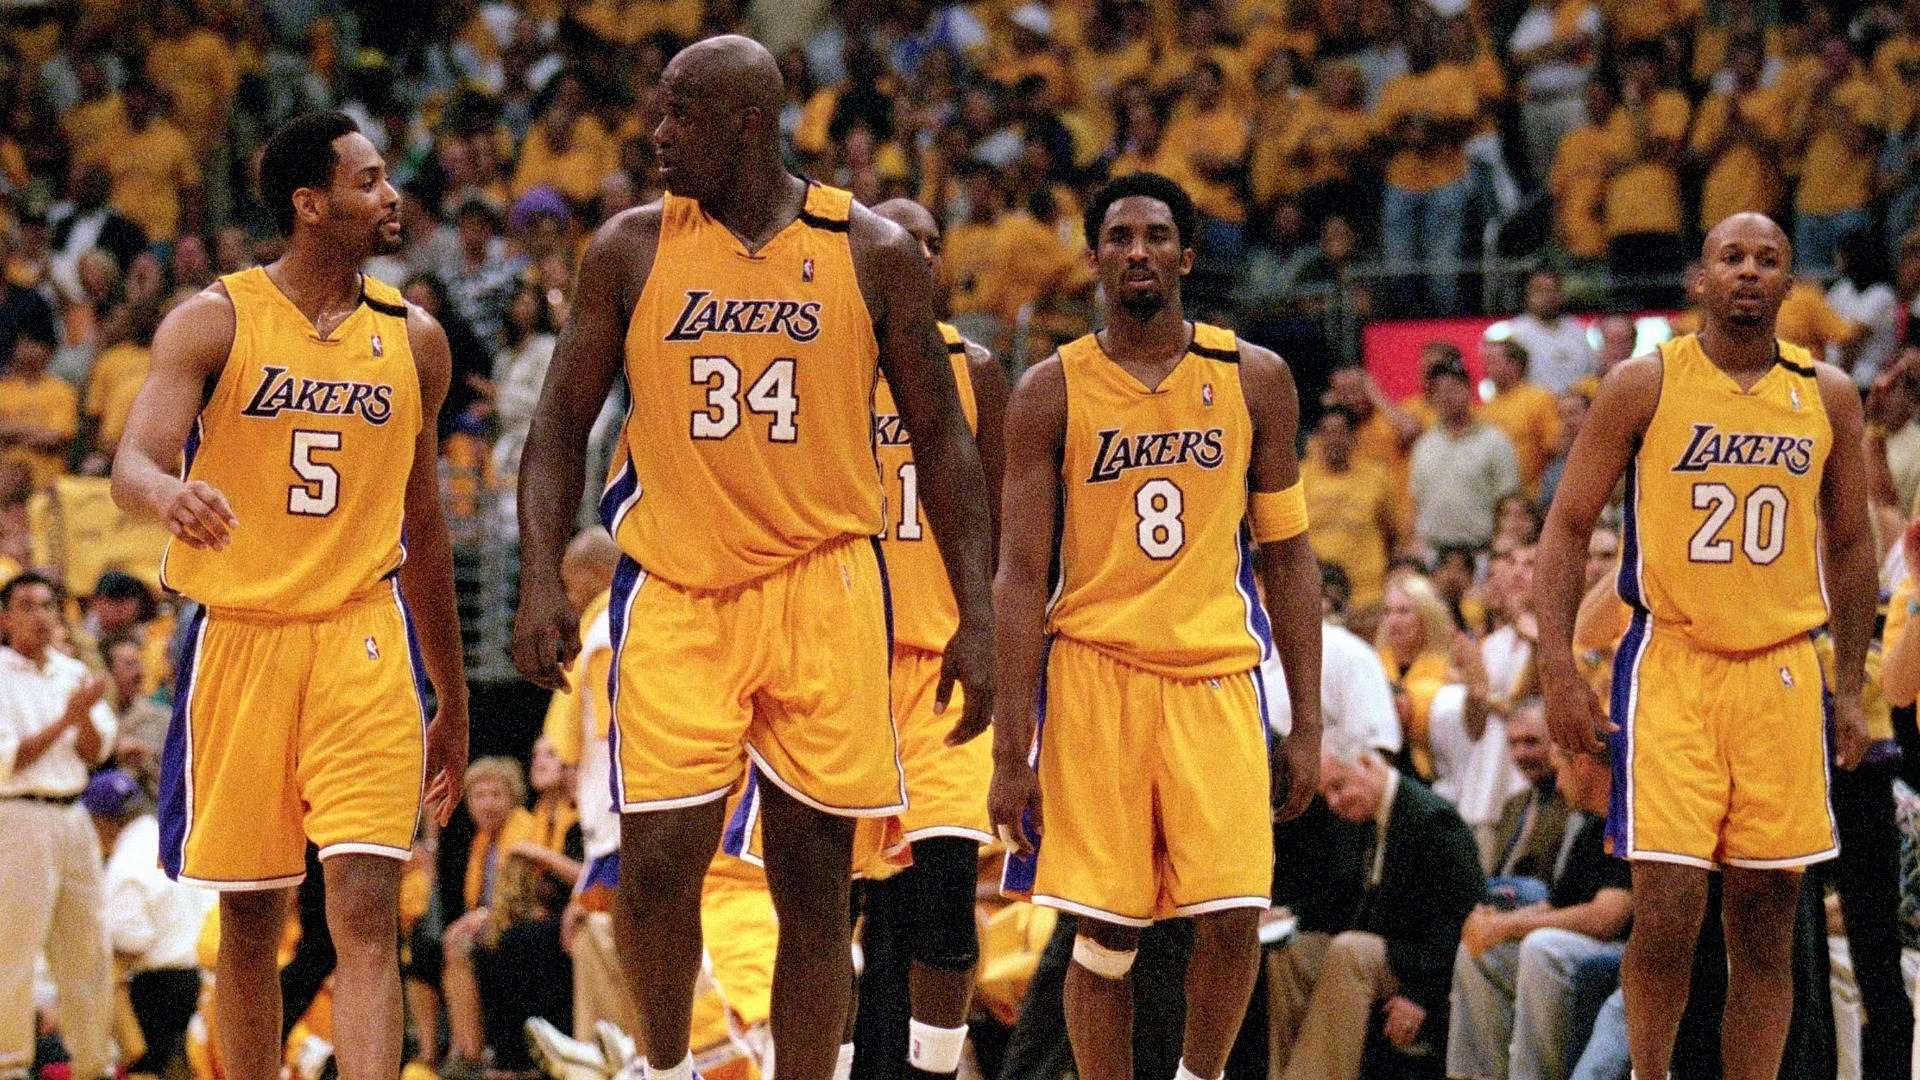 Shaq and Robert Horry